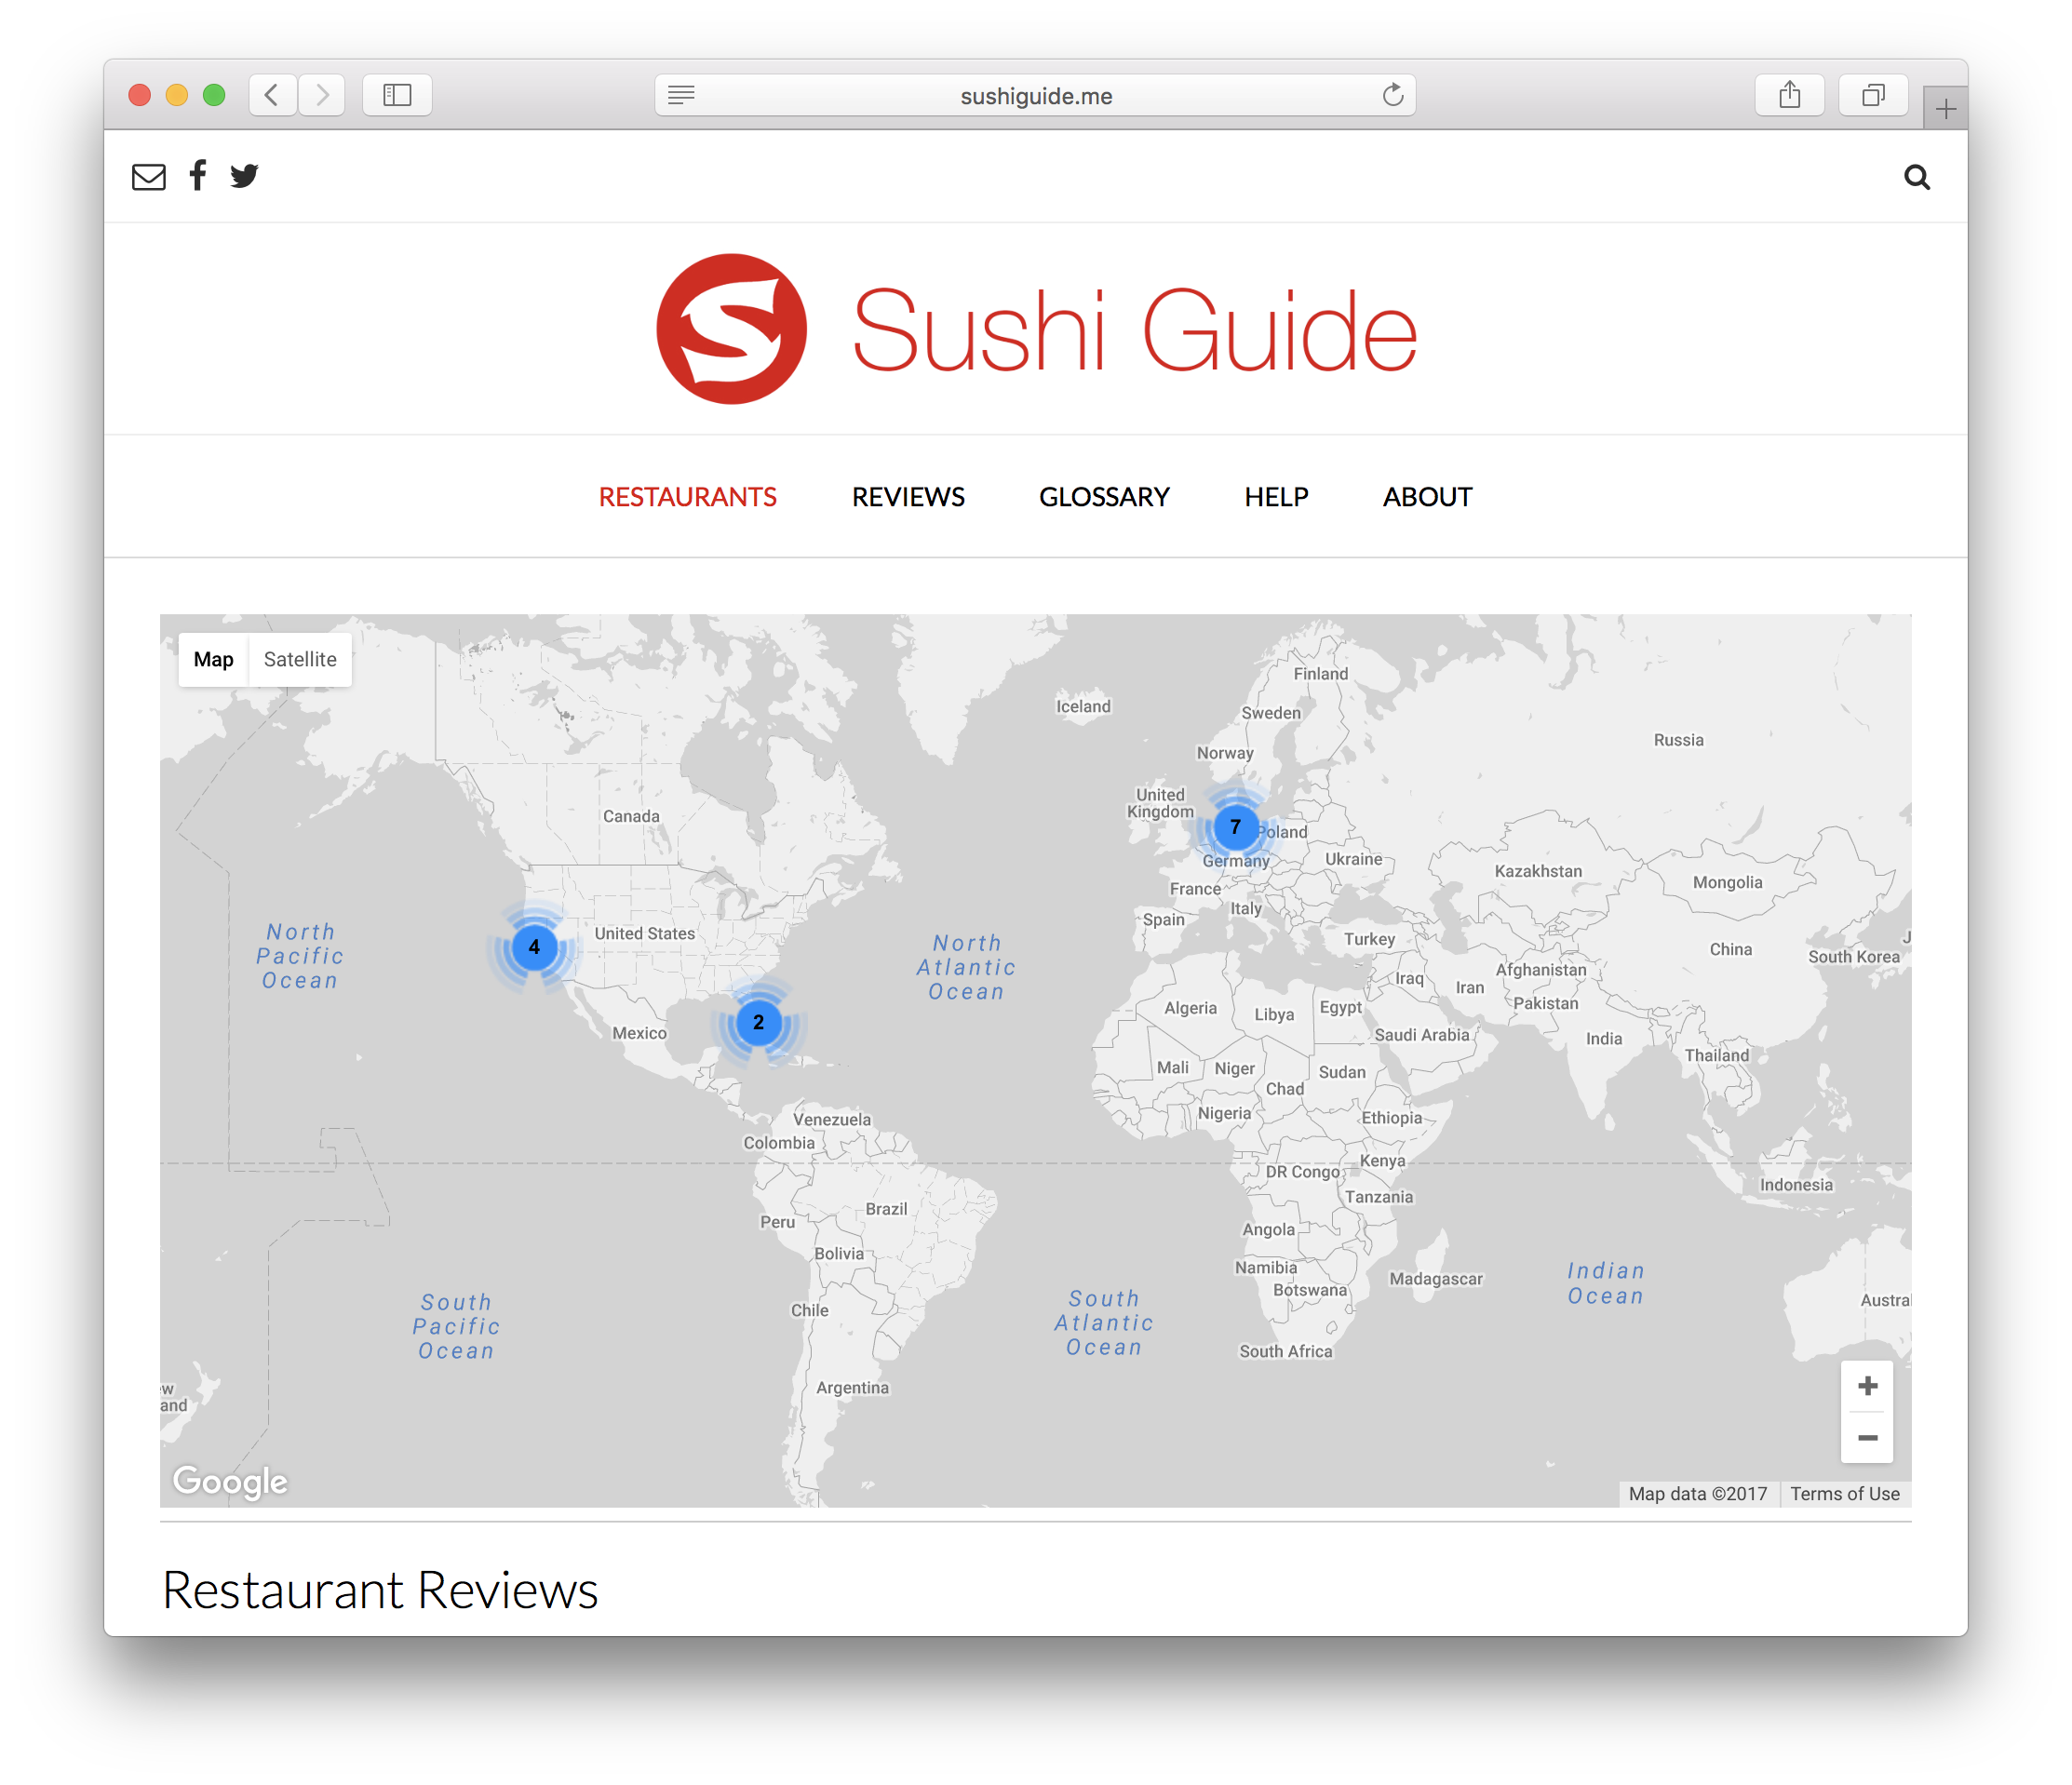 Sushi Guide - Overview Map